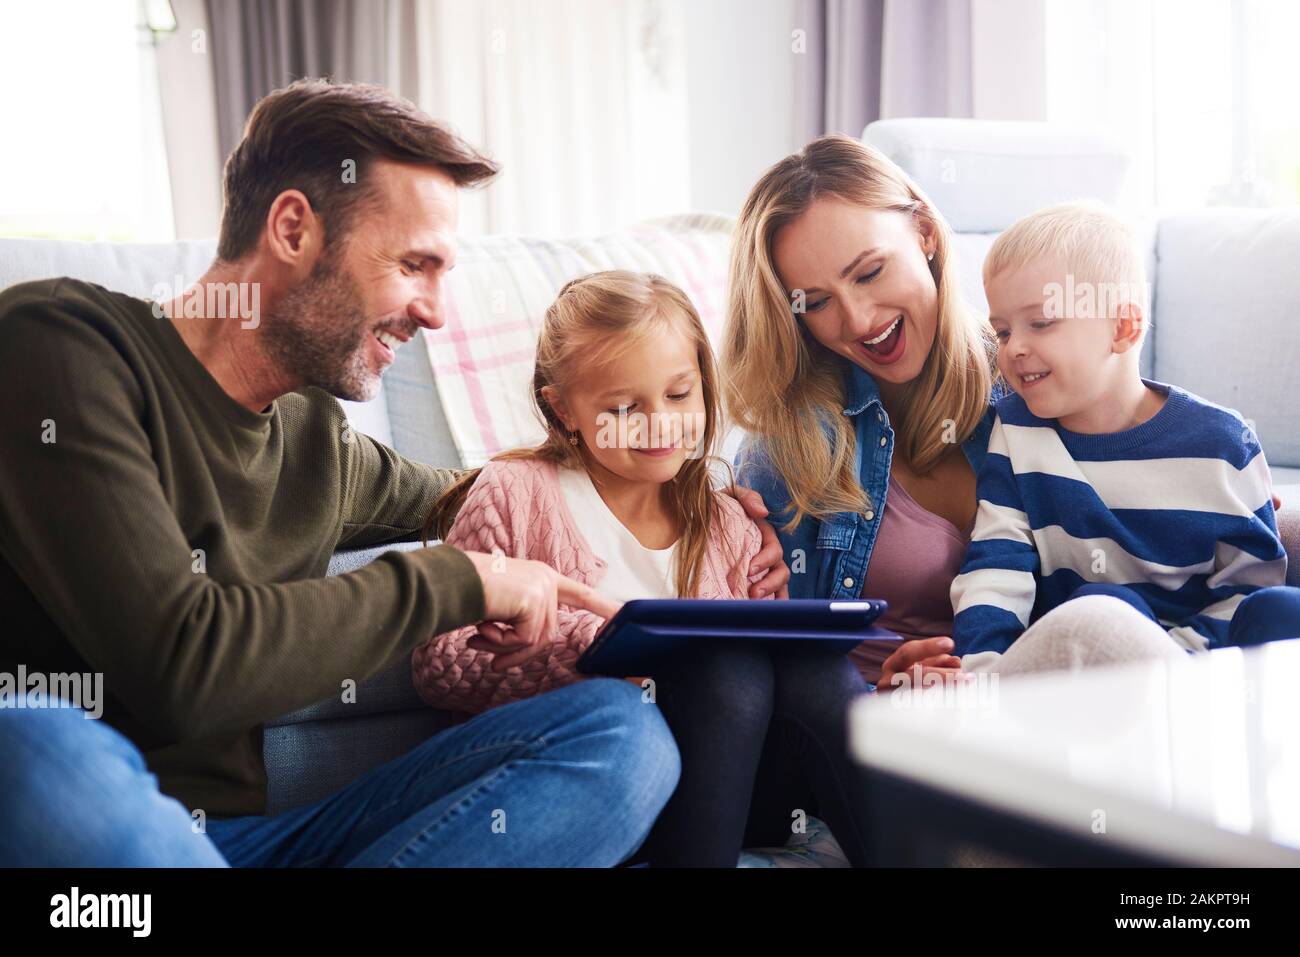 Happy family with tablet spending time together in living room Stock Photo